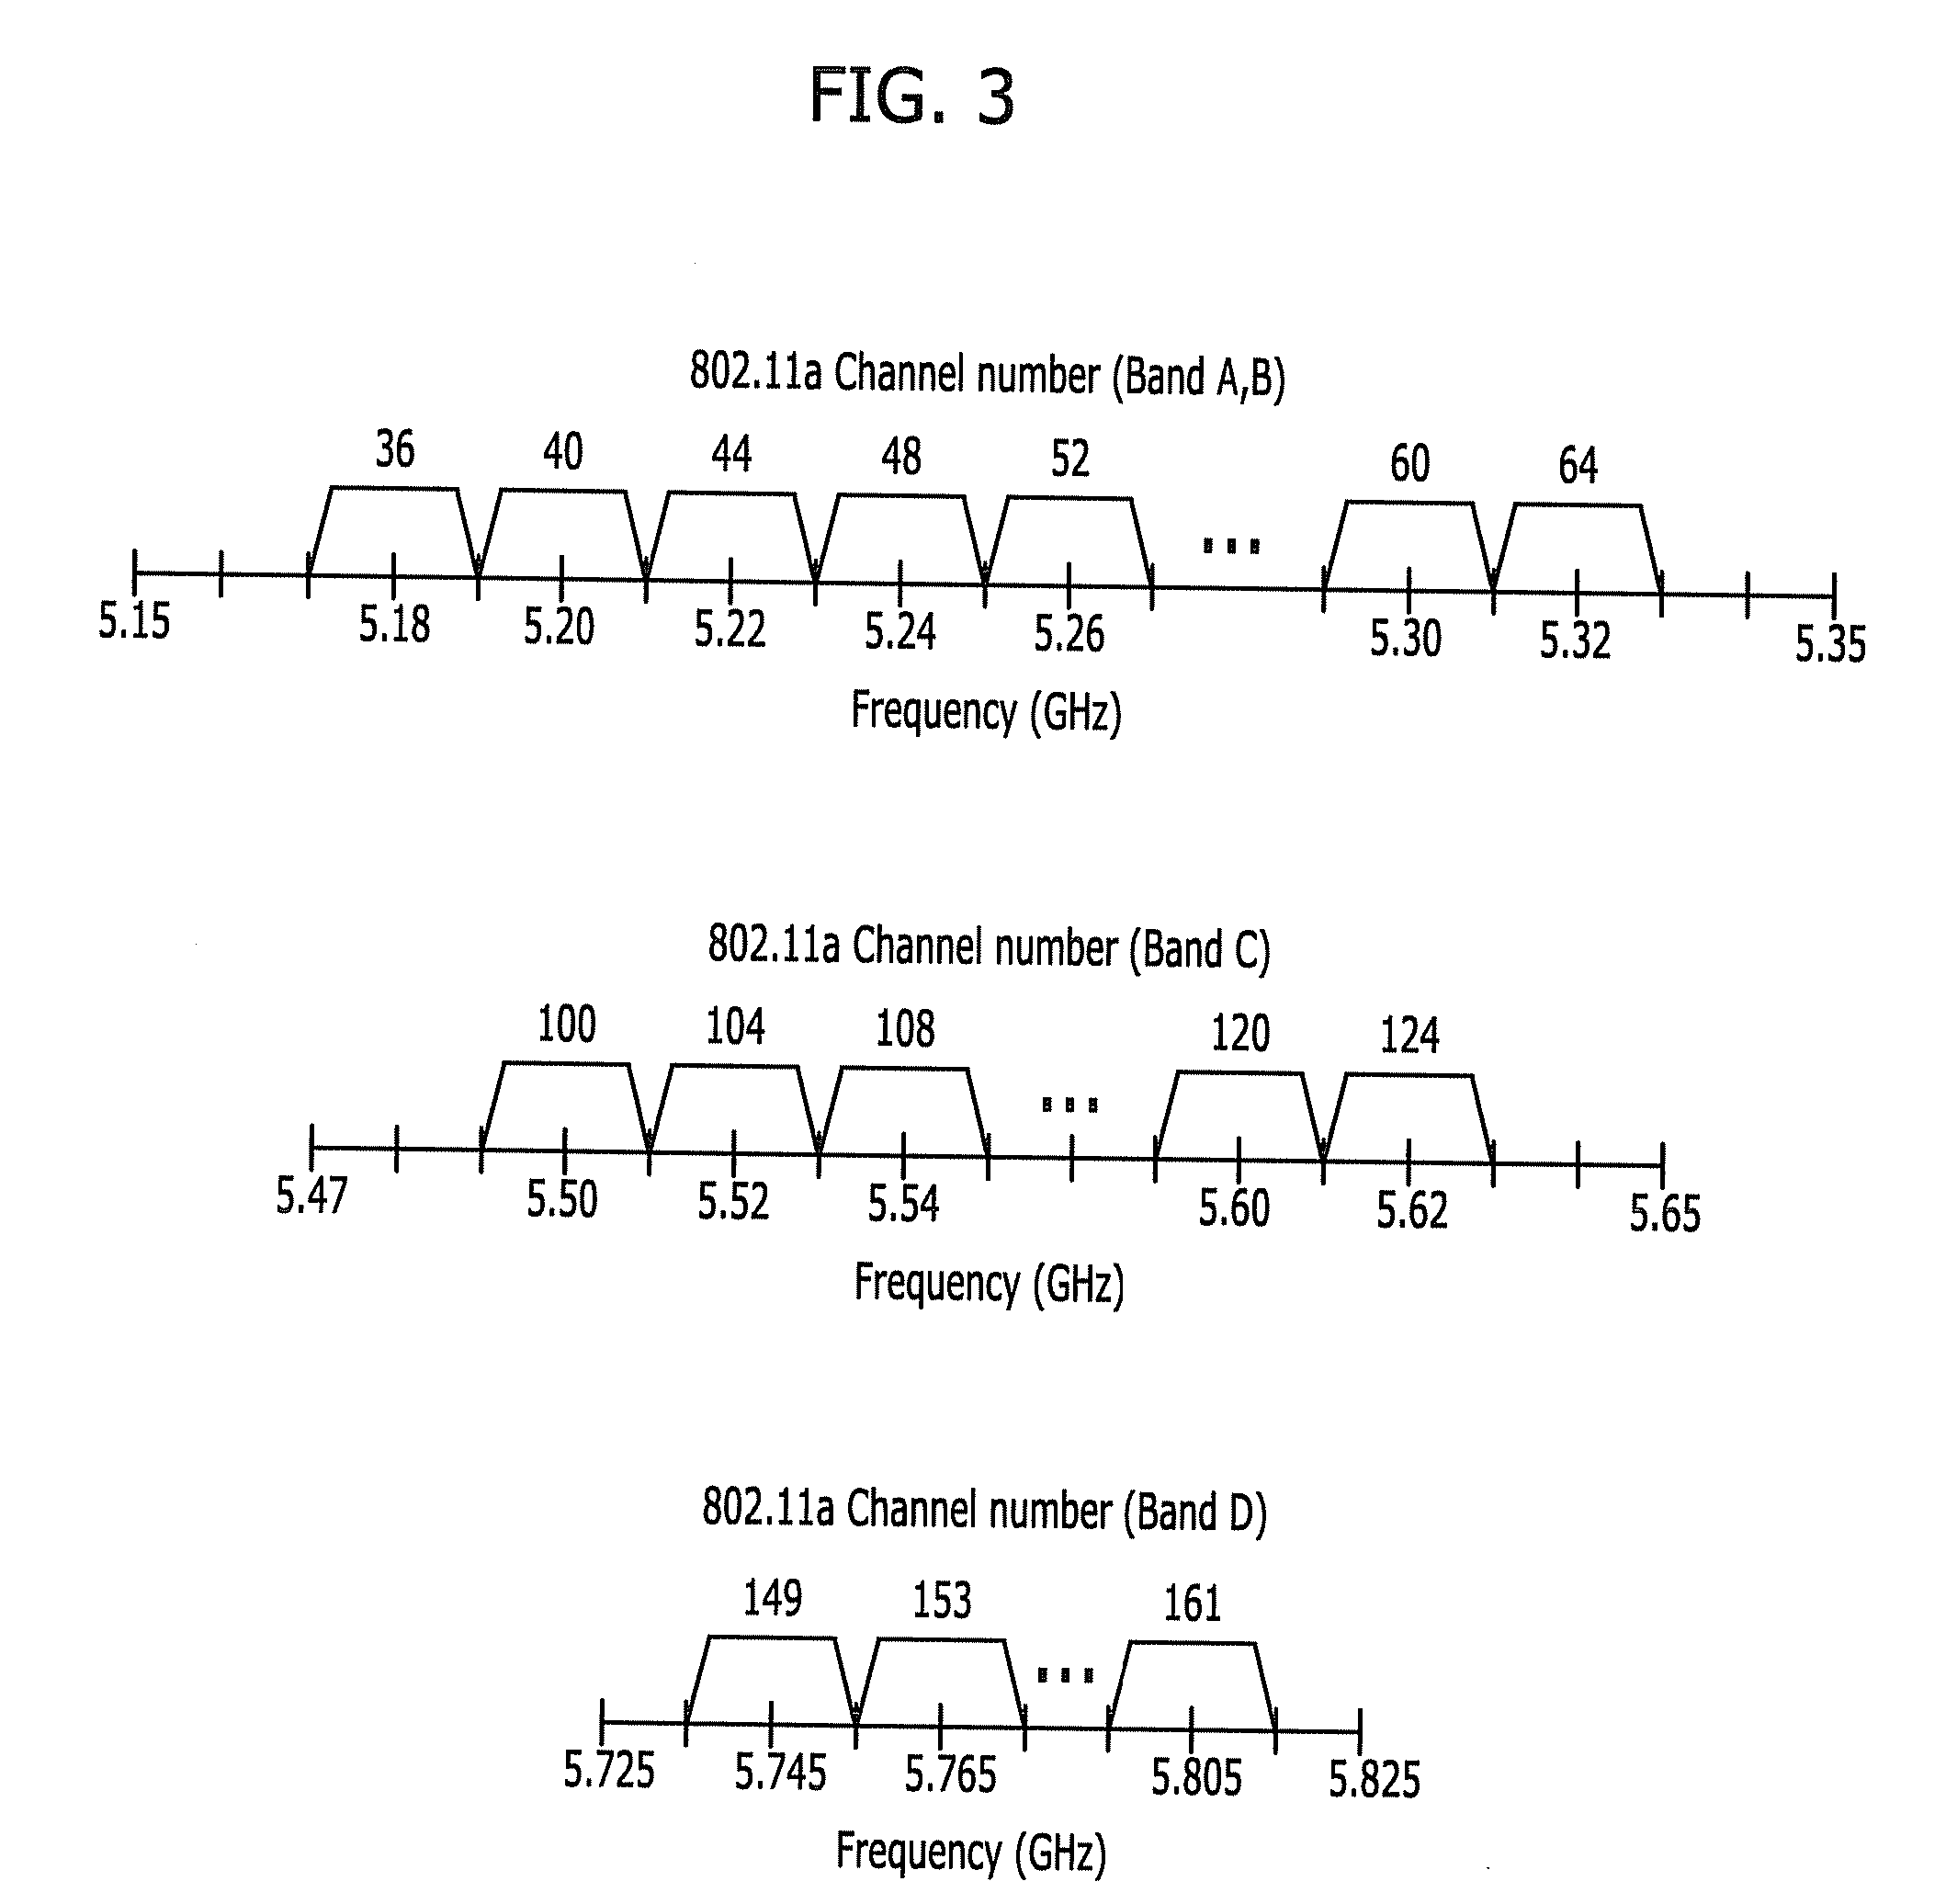 Apparatus and method for allocating in wireless communication system